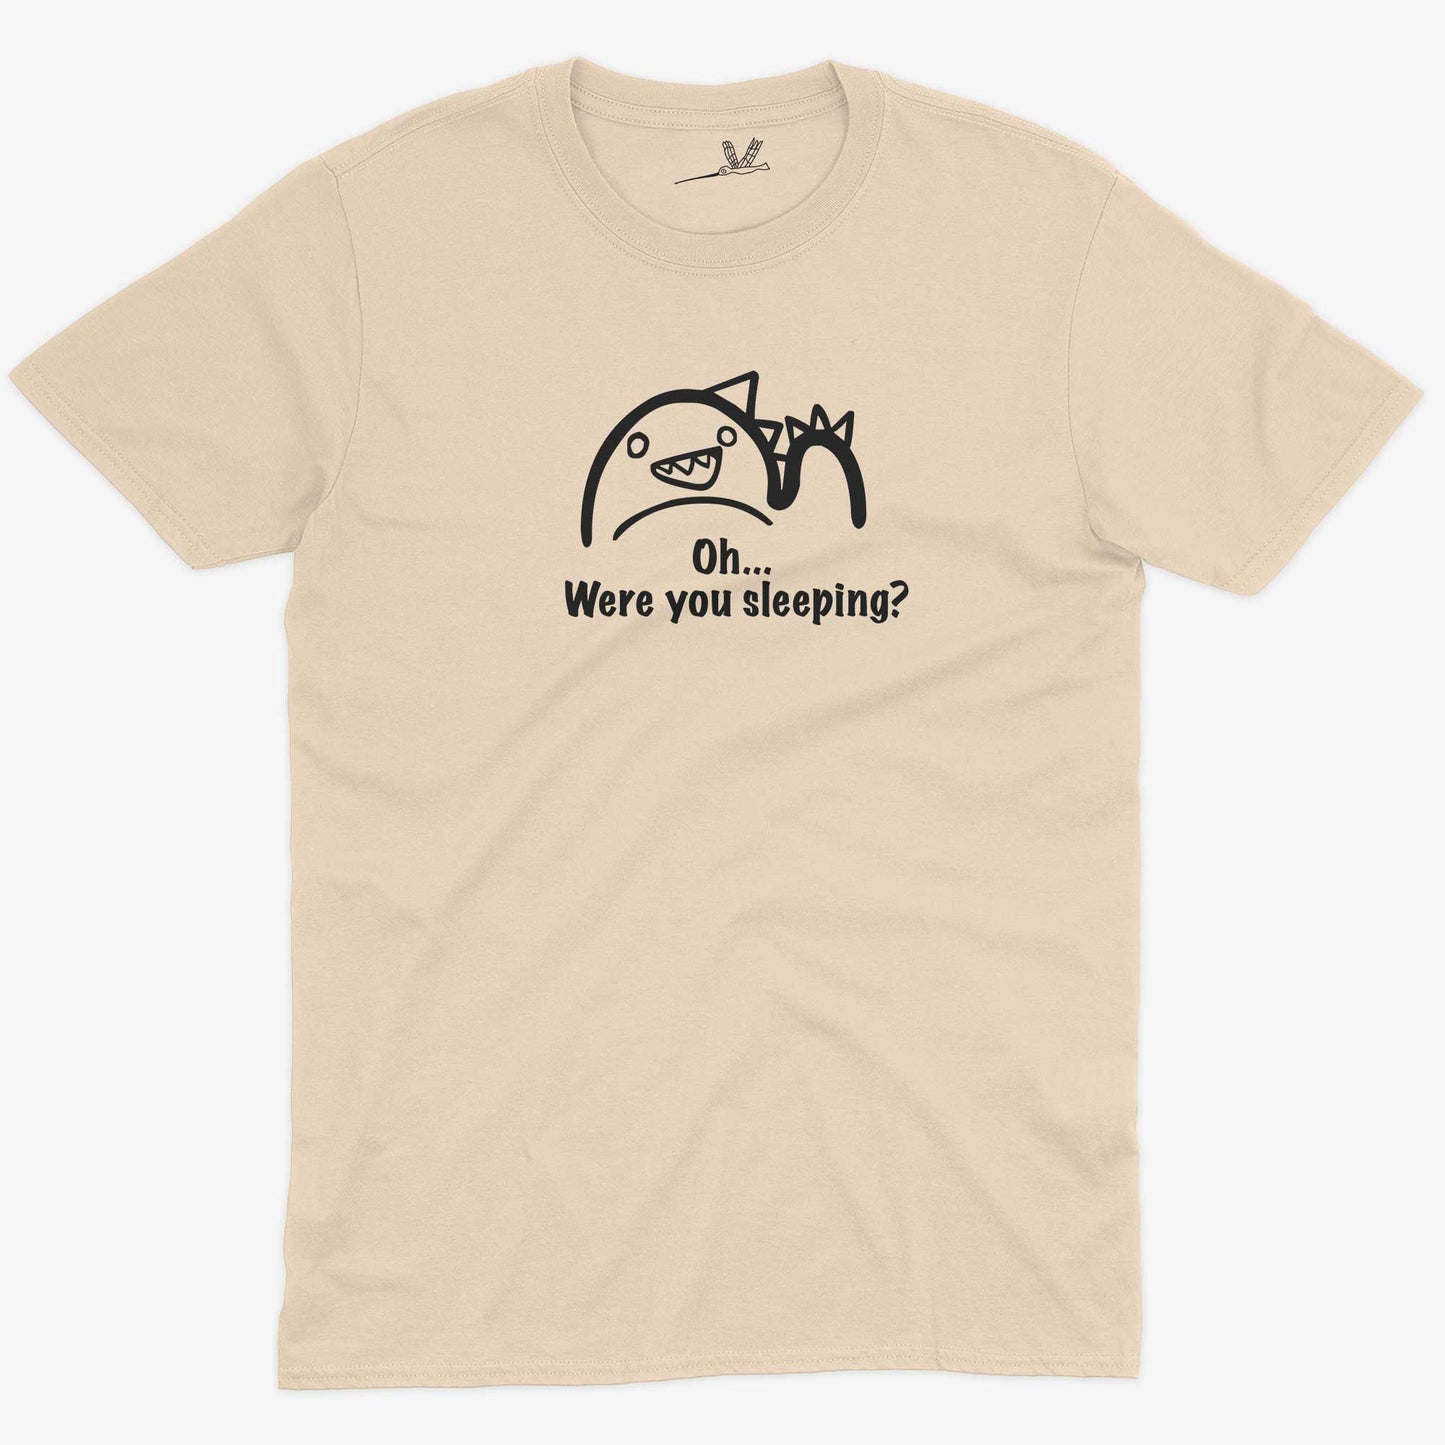 Oh...Were you sleeping? Women's or Unisex Funny T-shirt-Organic Natural-Unisex